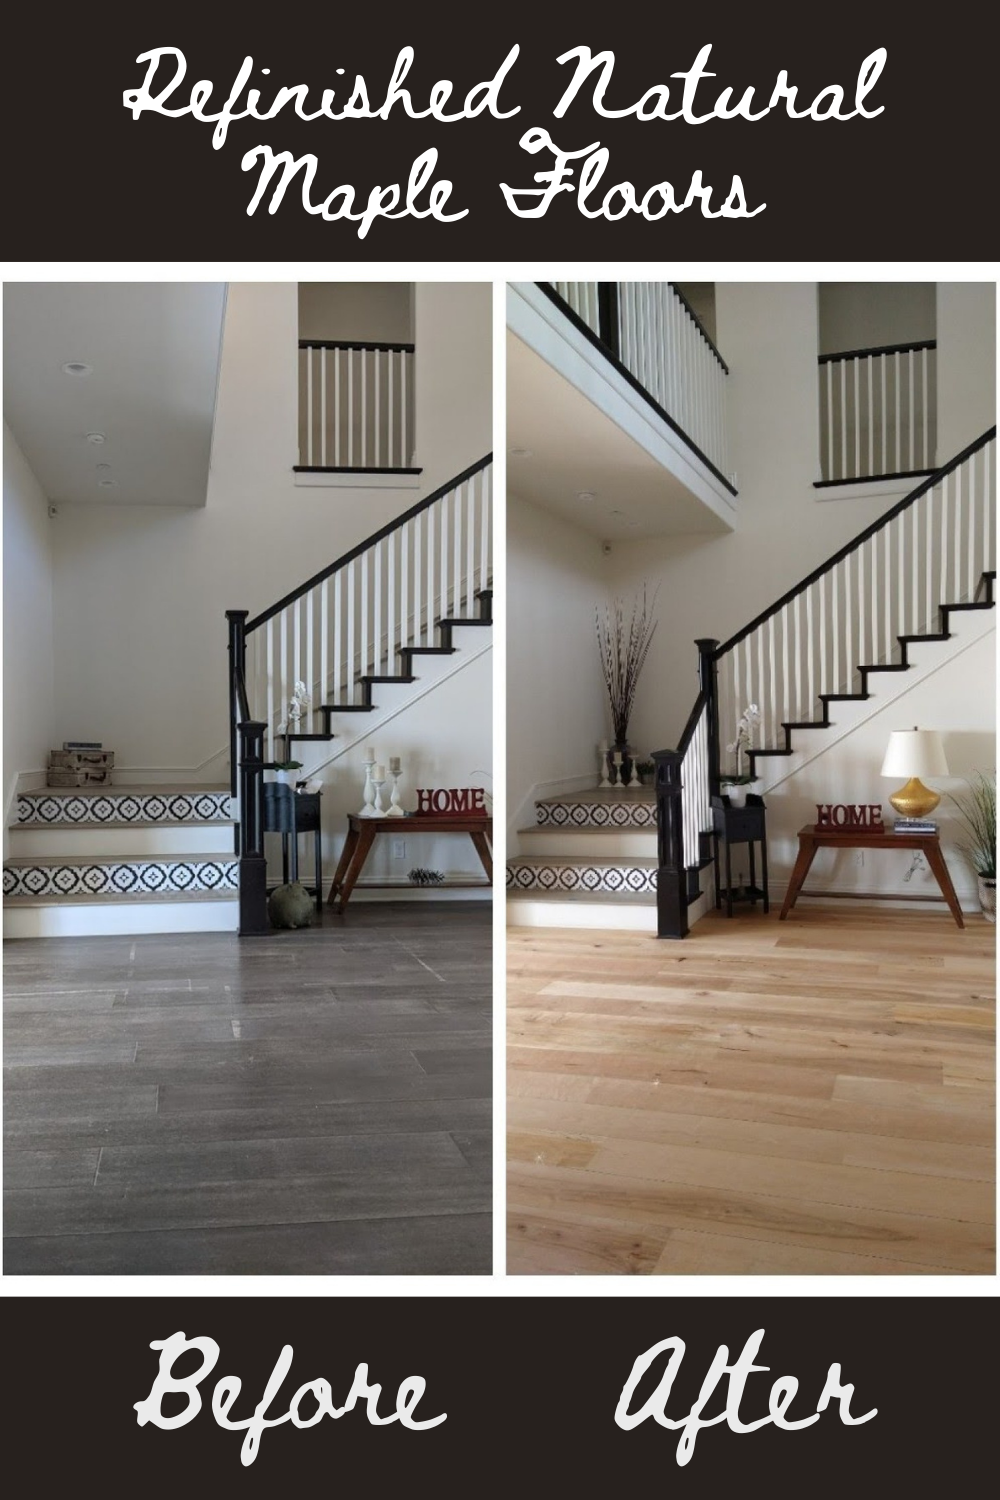 Give your house a rustic look, use dark
  wood flooring